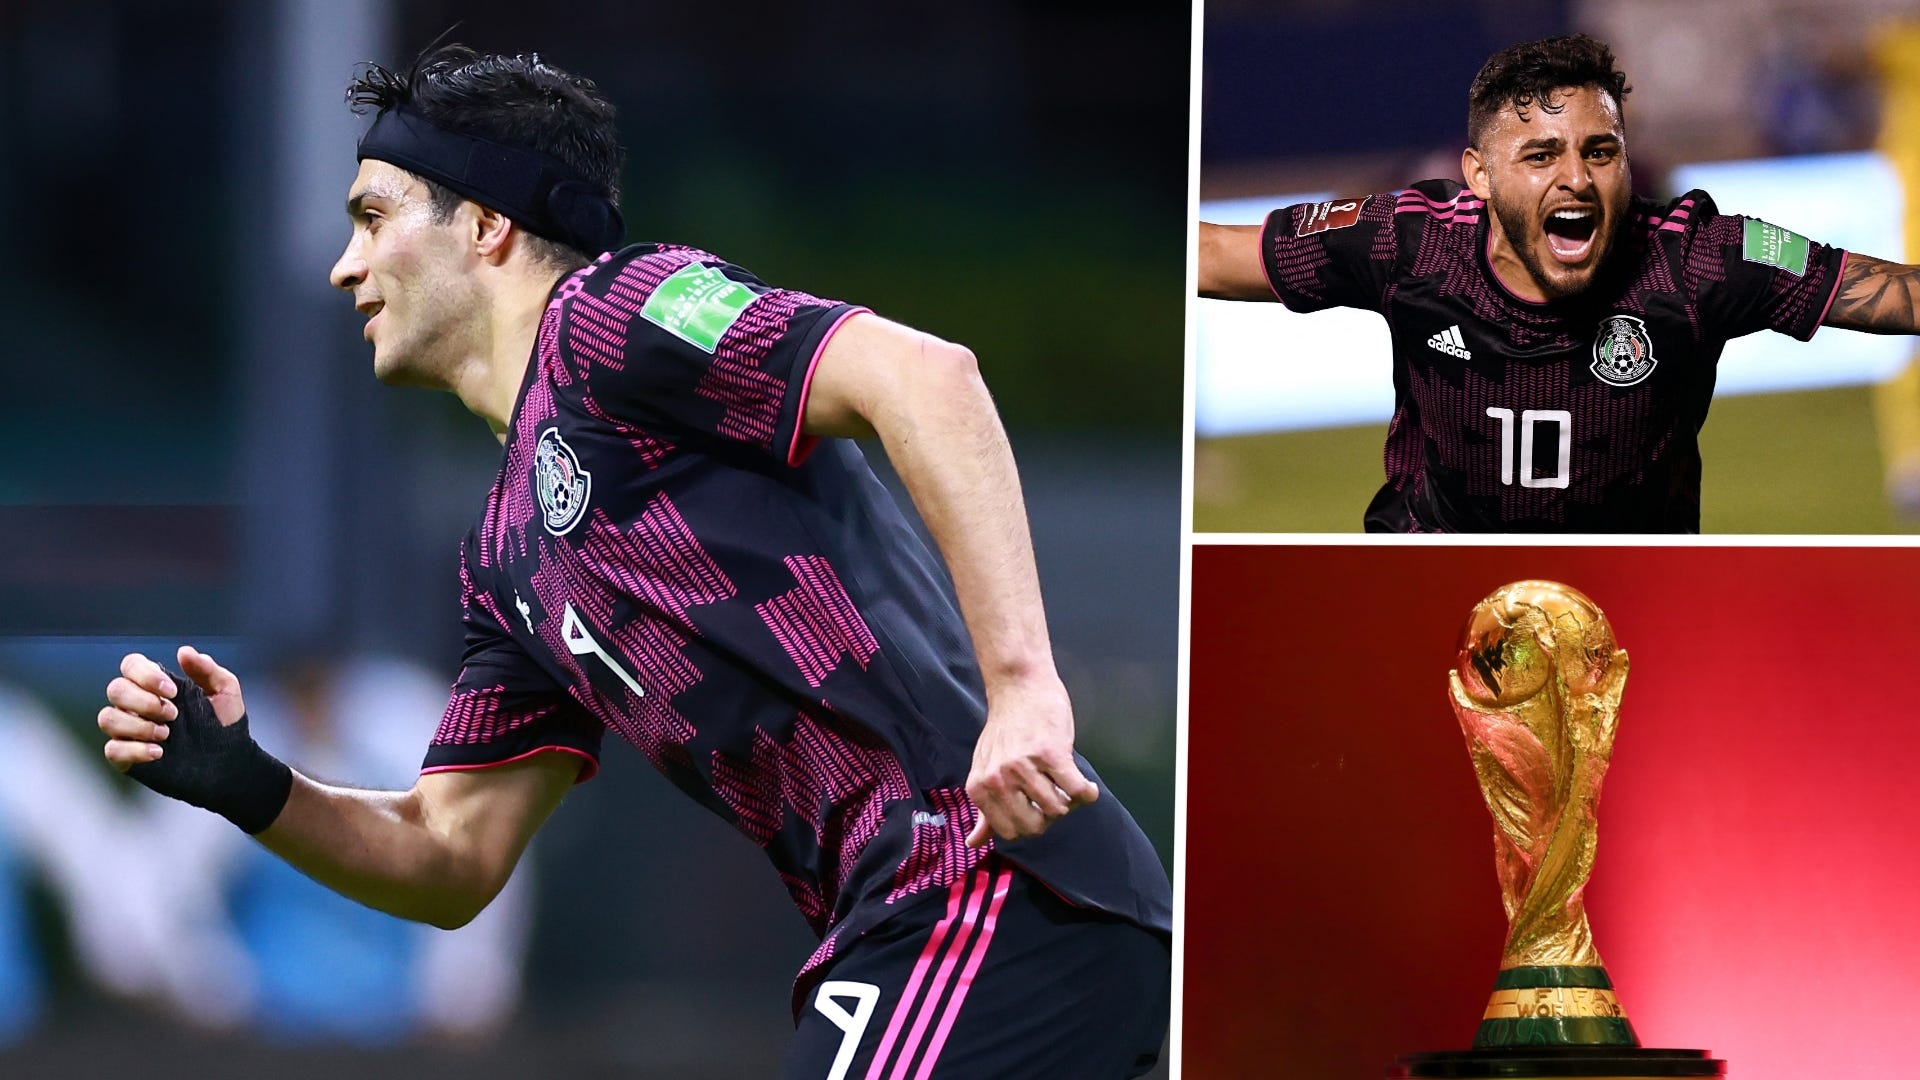 What results do Mexico need to qualify for the World Cup 2022